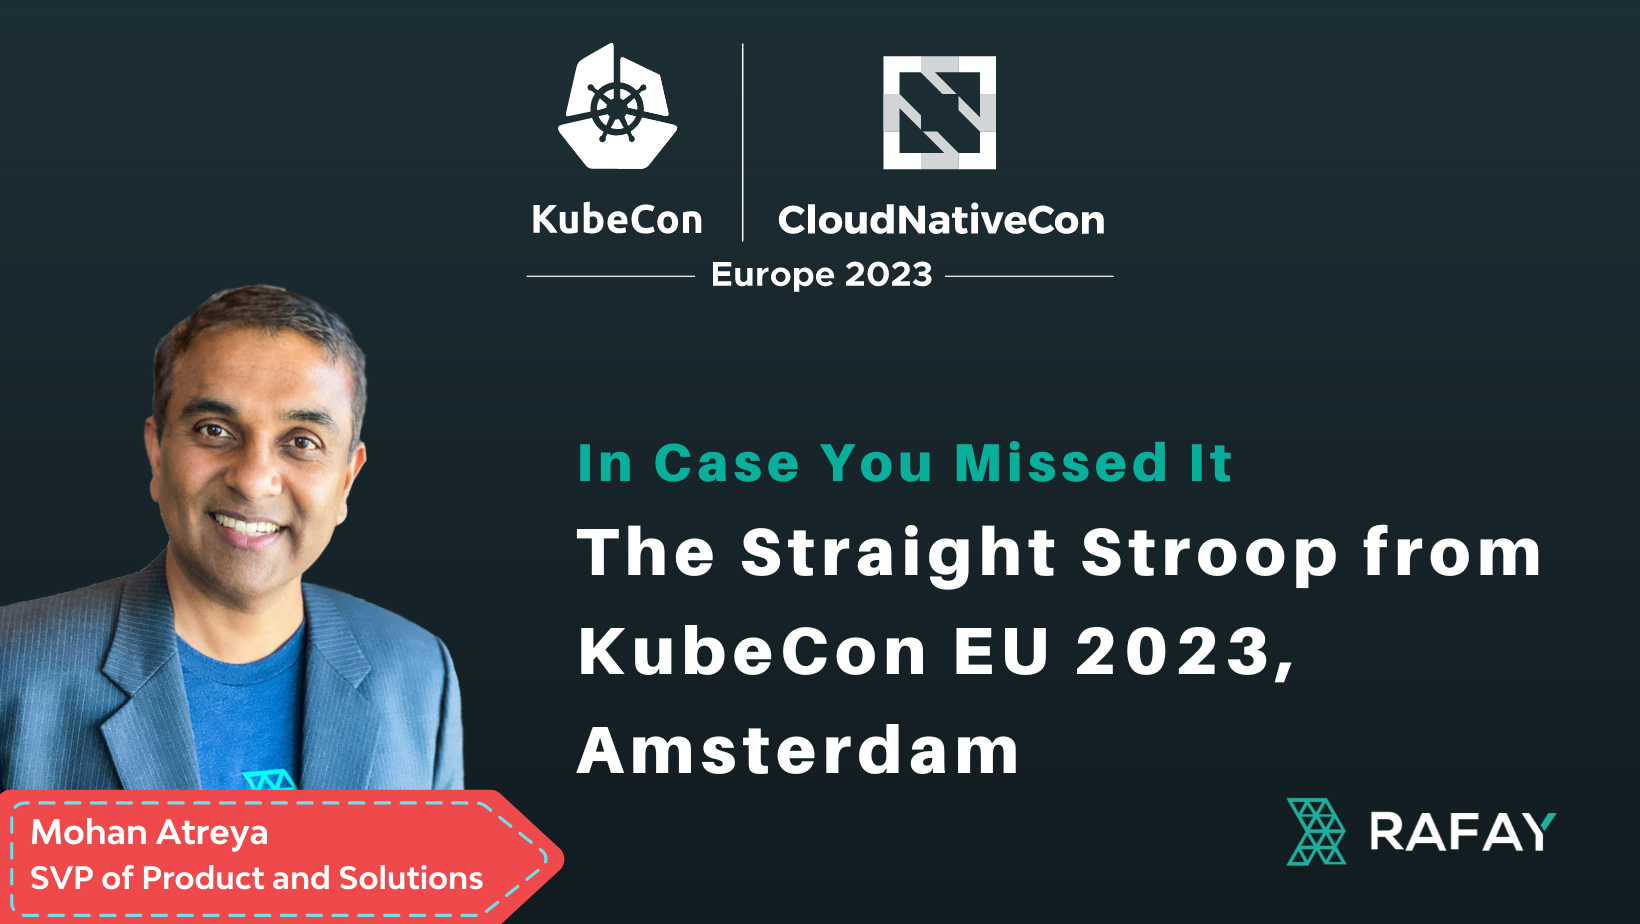 Image for The Straight Stroop from KubeCon EU 2023, Amsterdam